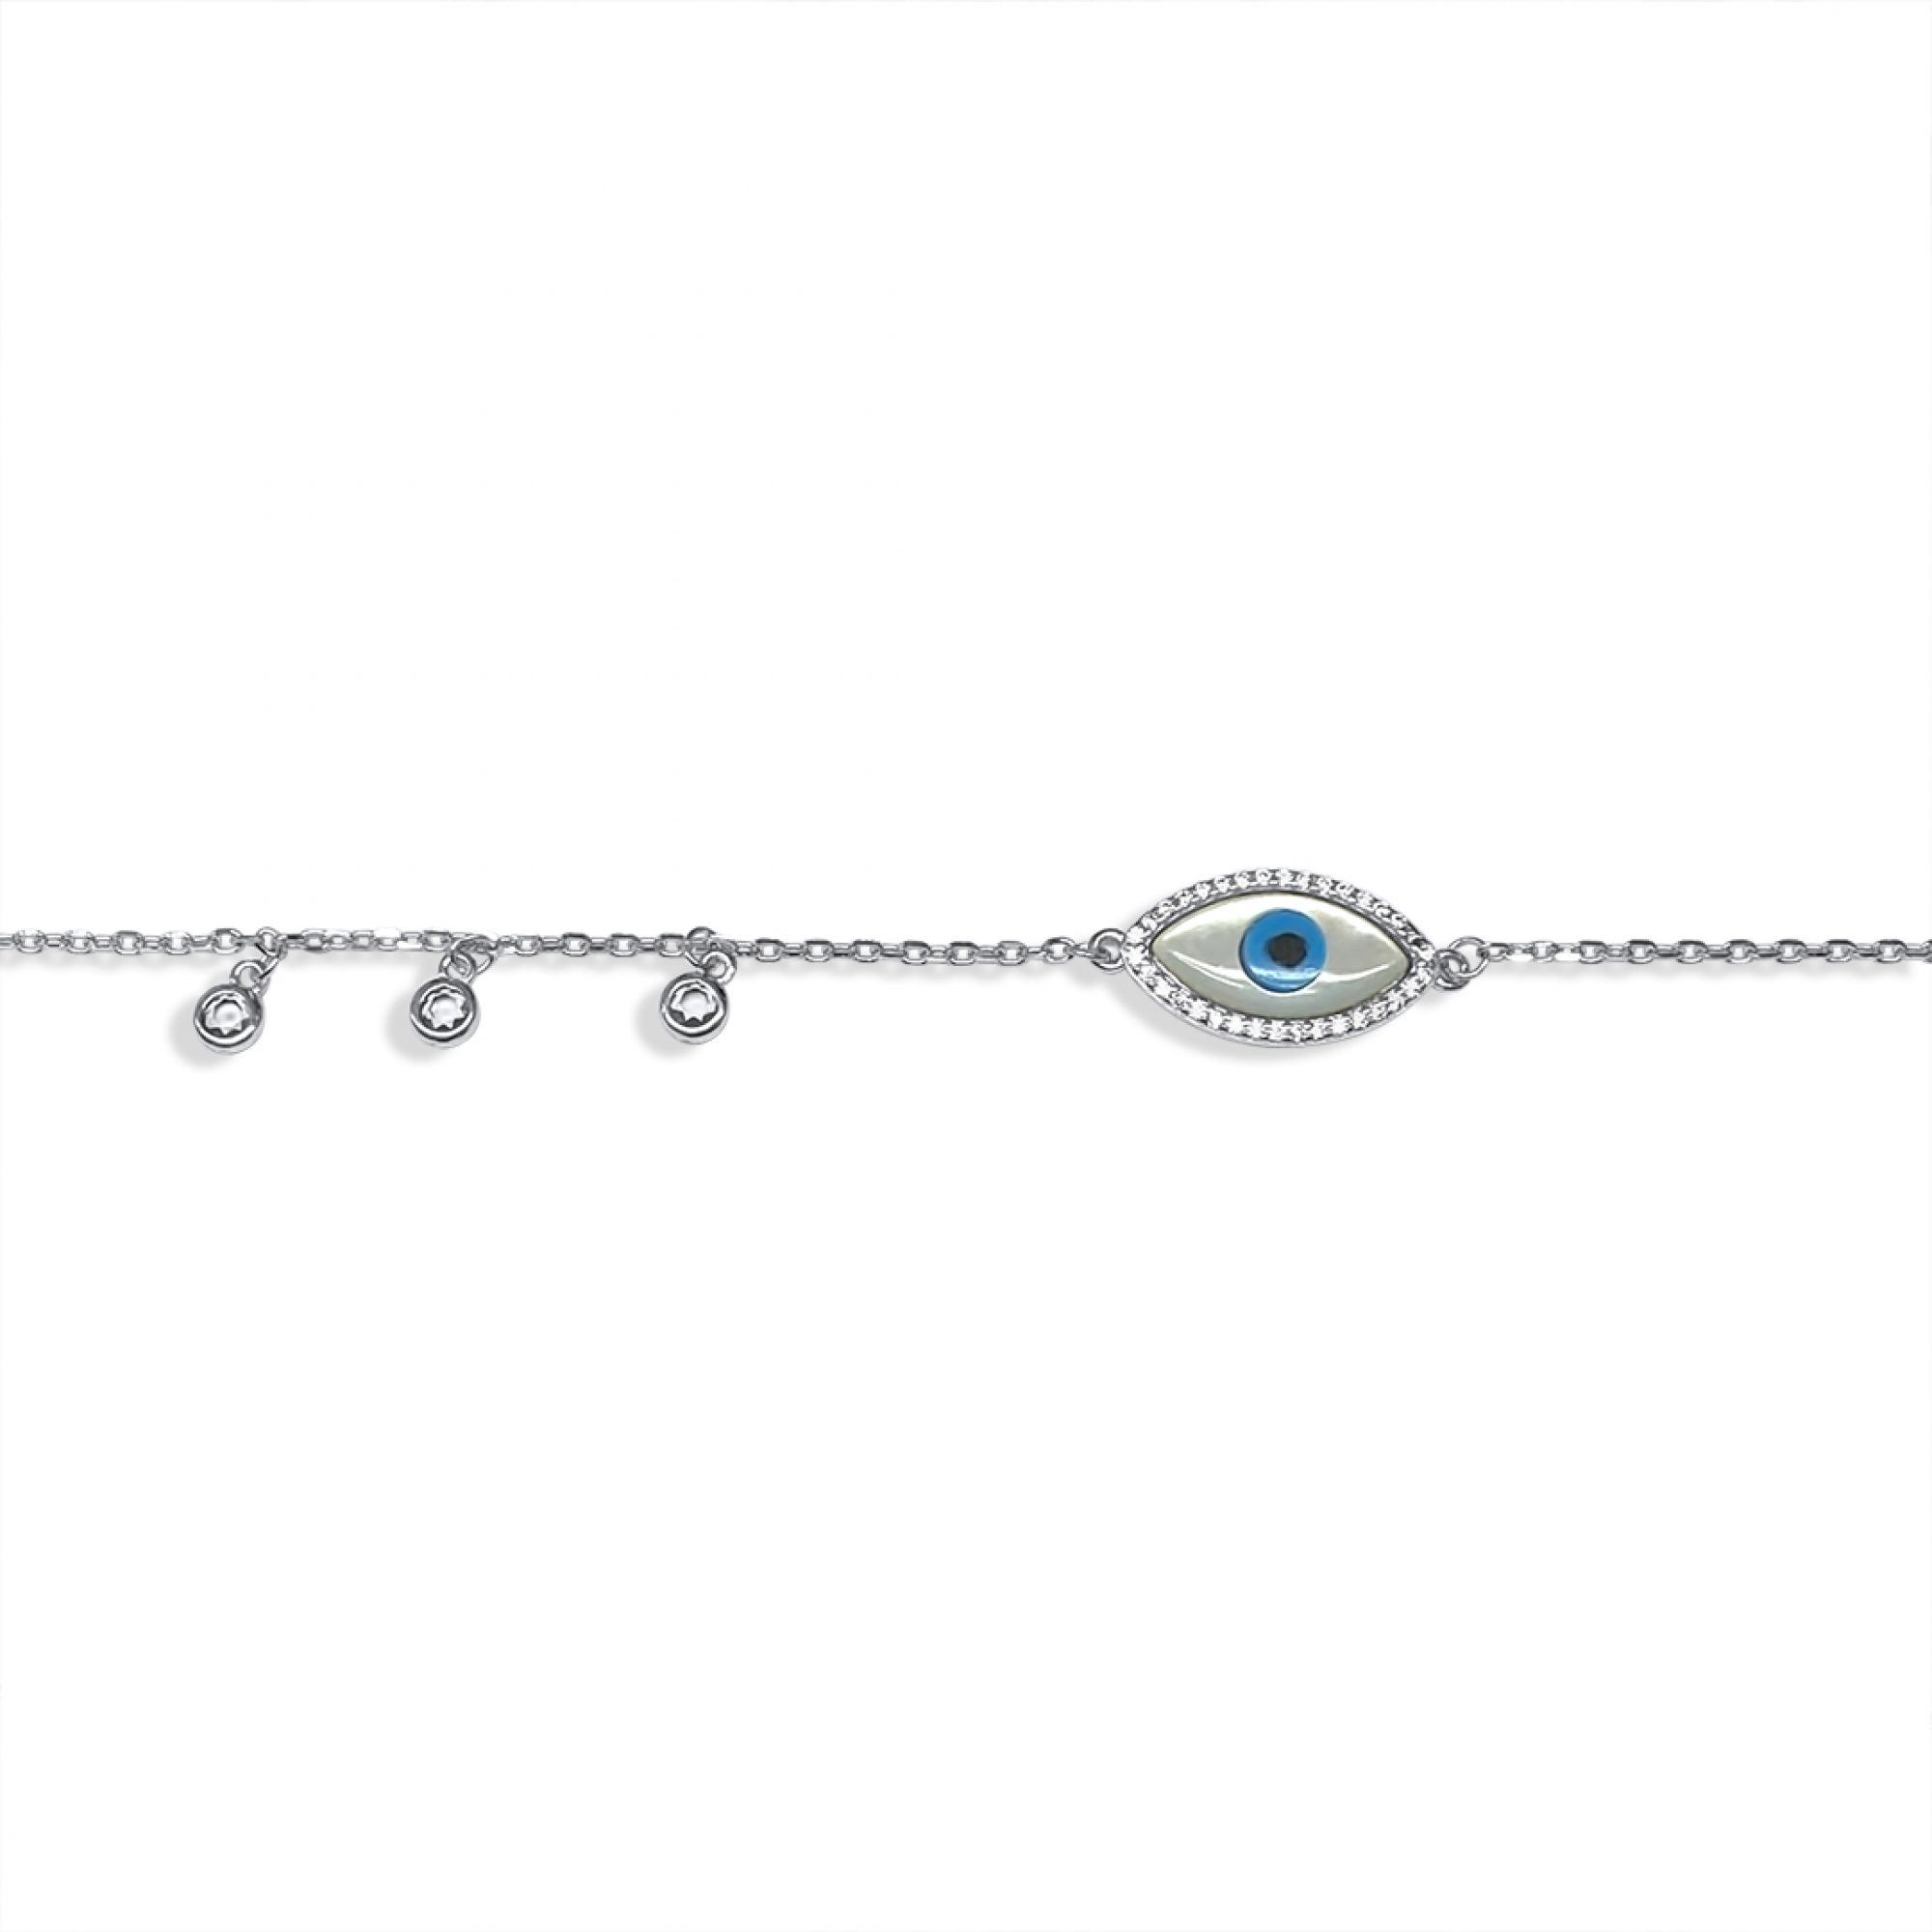 Eye bracelet with mother of pearl and zircon stones